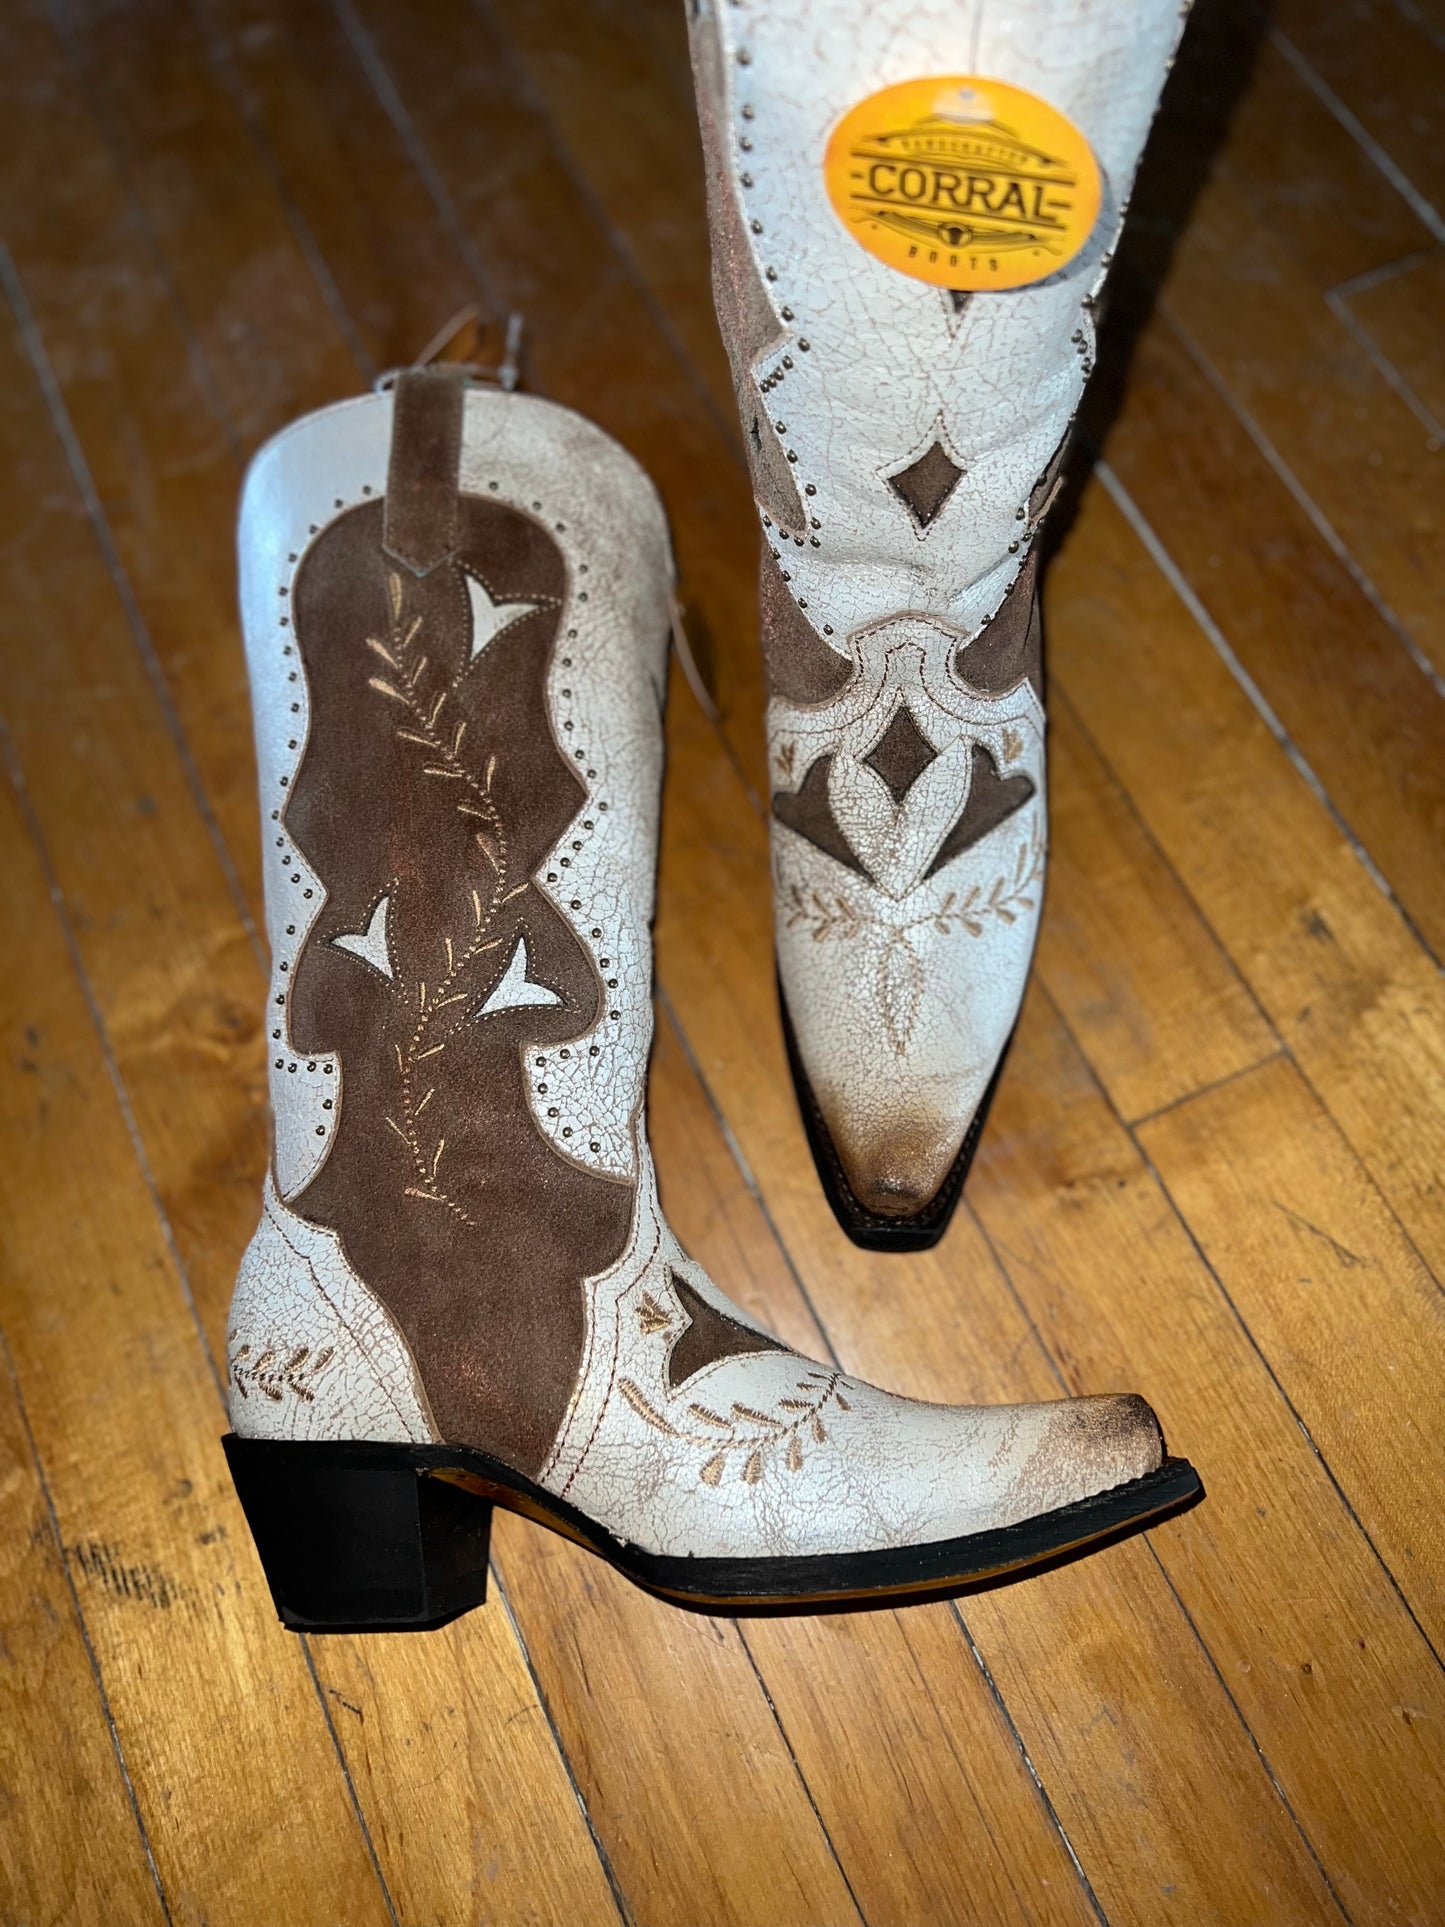 The Makenna Corral Boots